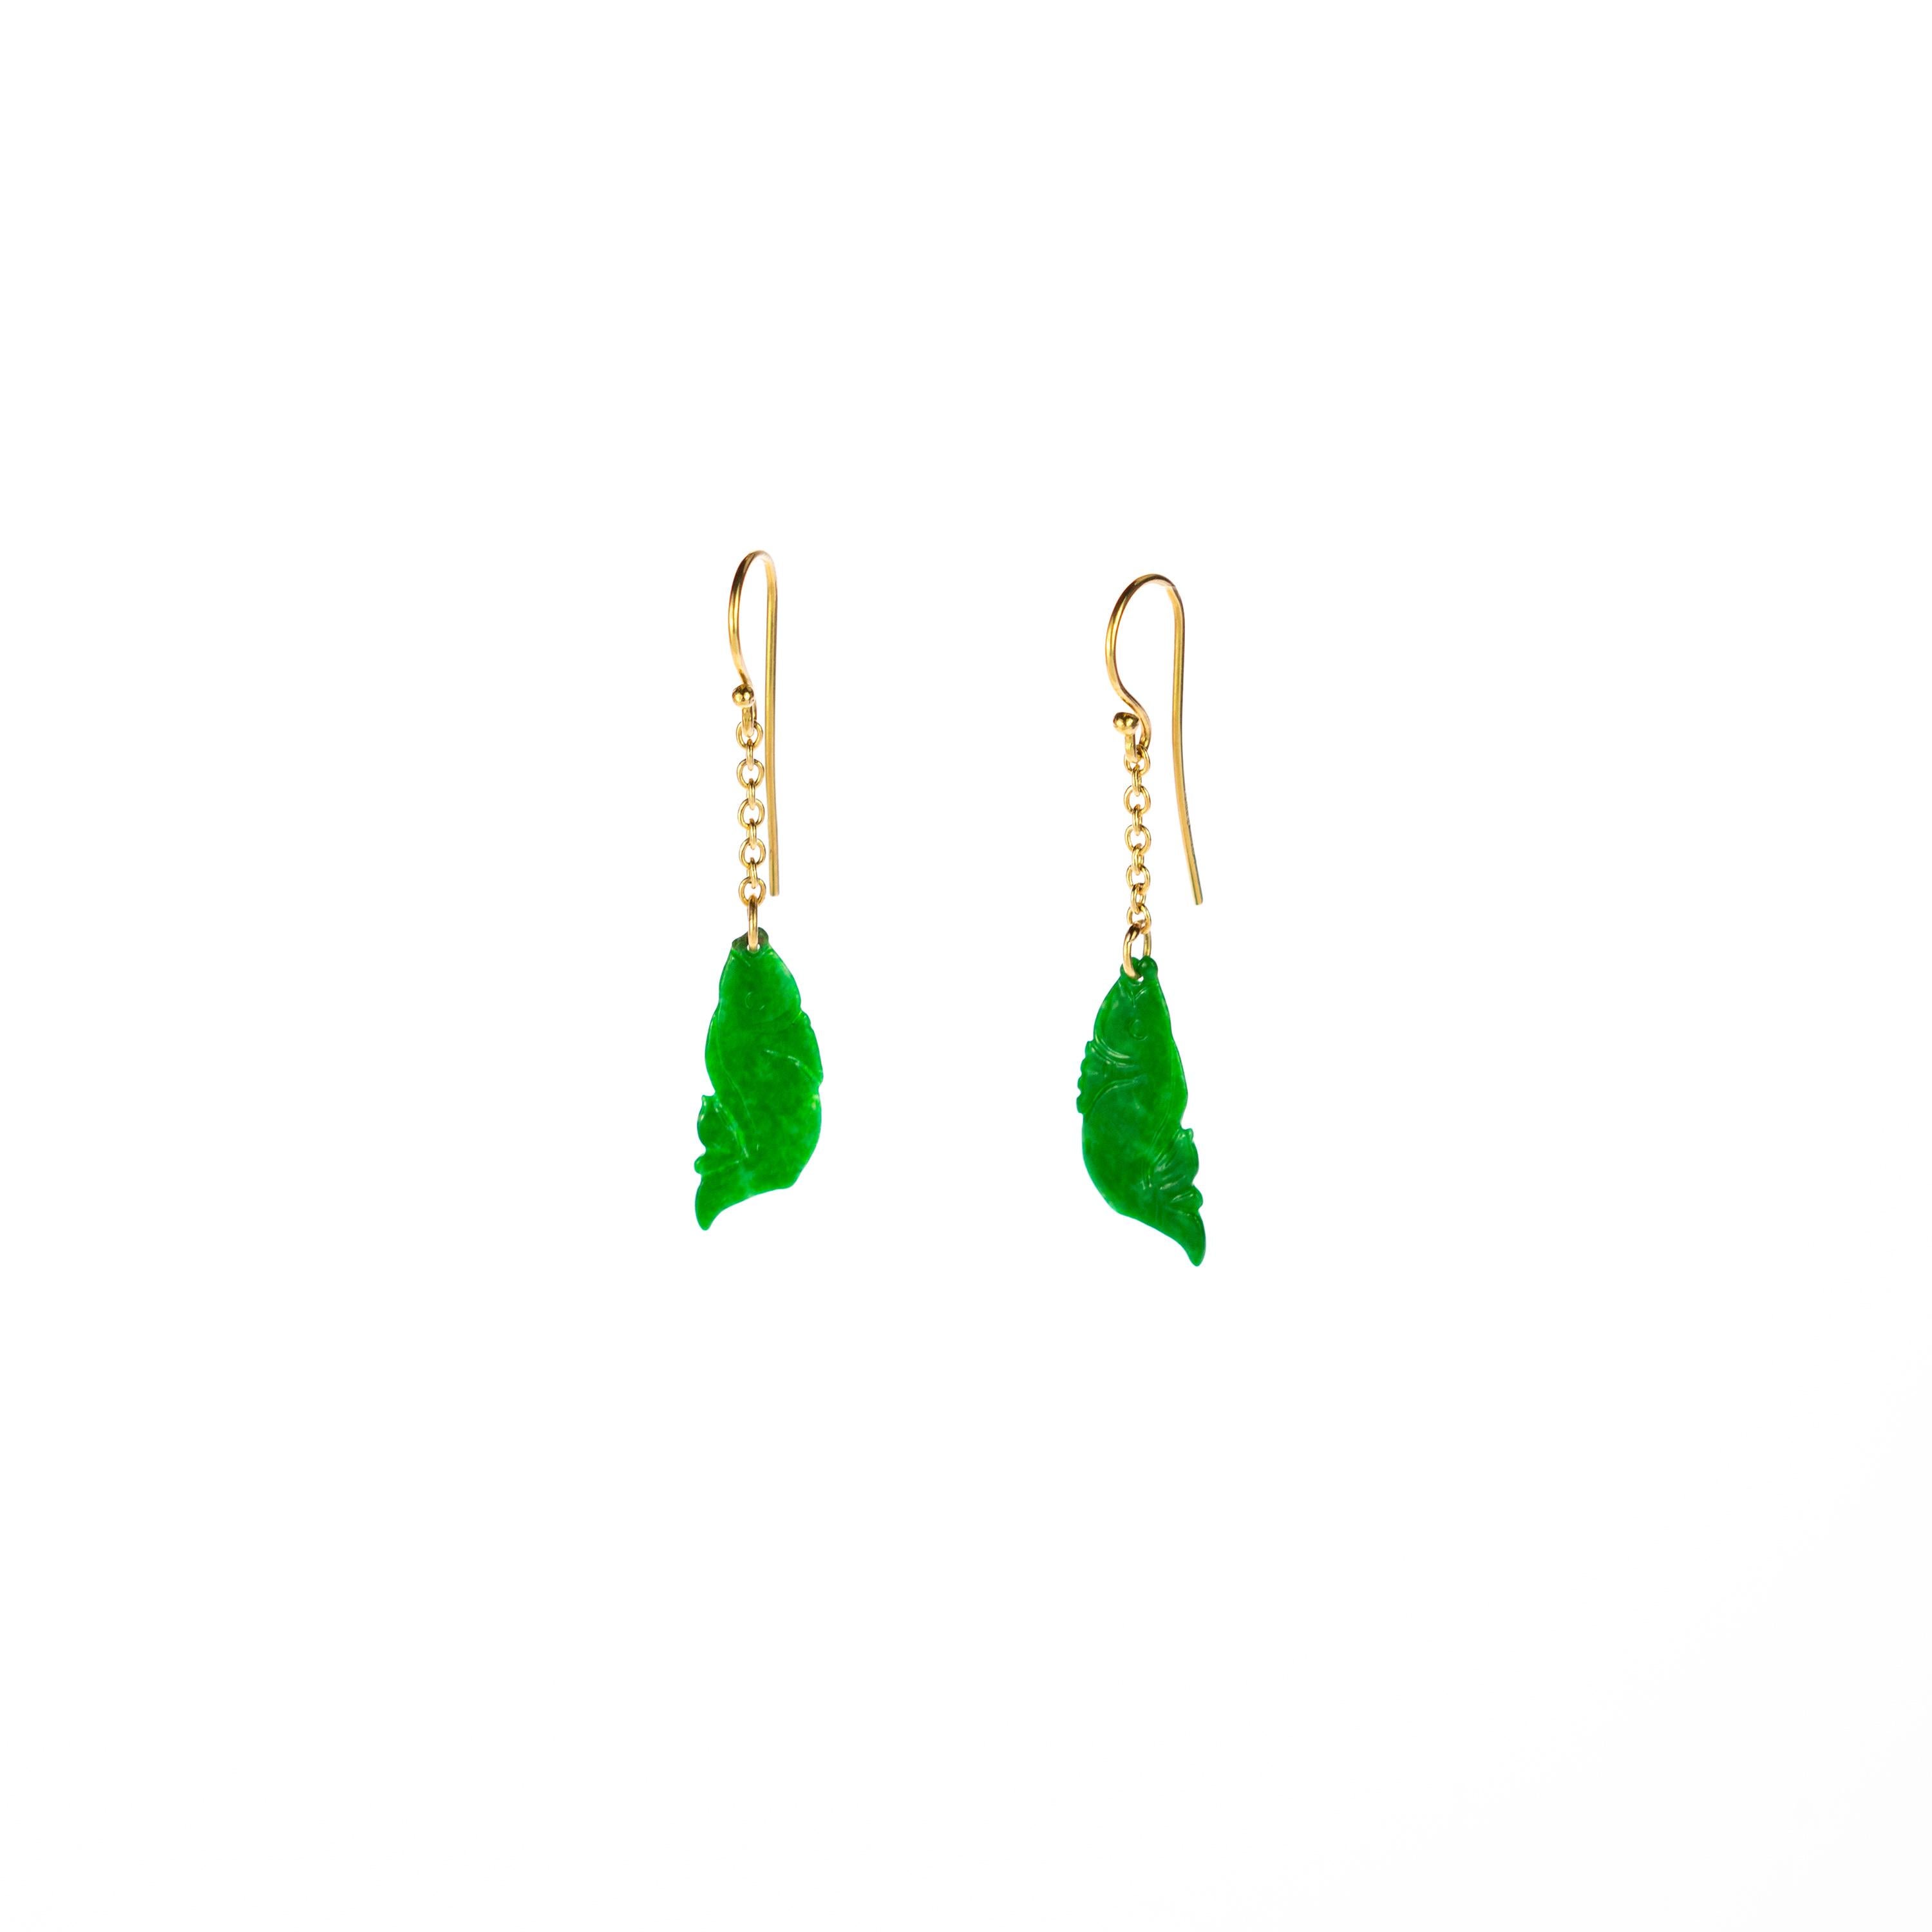 A stunning 18 karat yellow gold earrings chain that ends in a traditional and unique natural jade stone. The green precious stone is carved in a fish shape with a flower tale. Long, dangle drop earrings created for a bold and delicate look. 
 
These